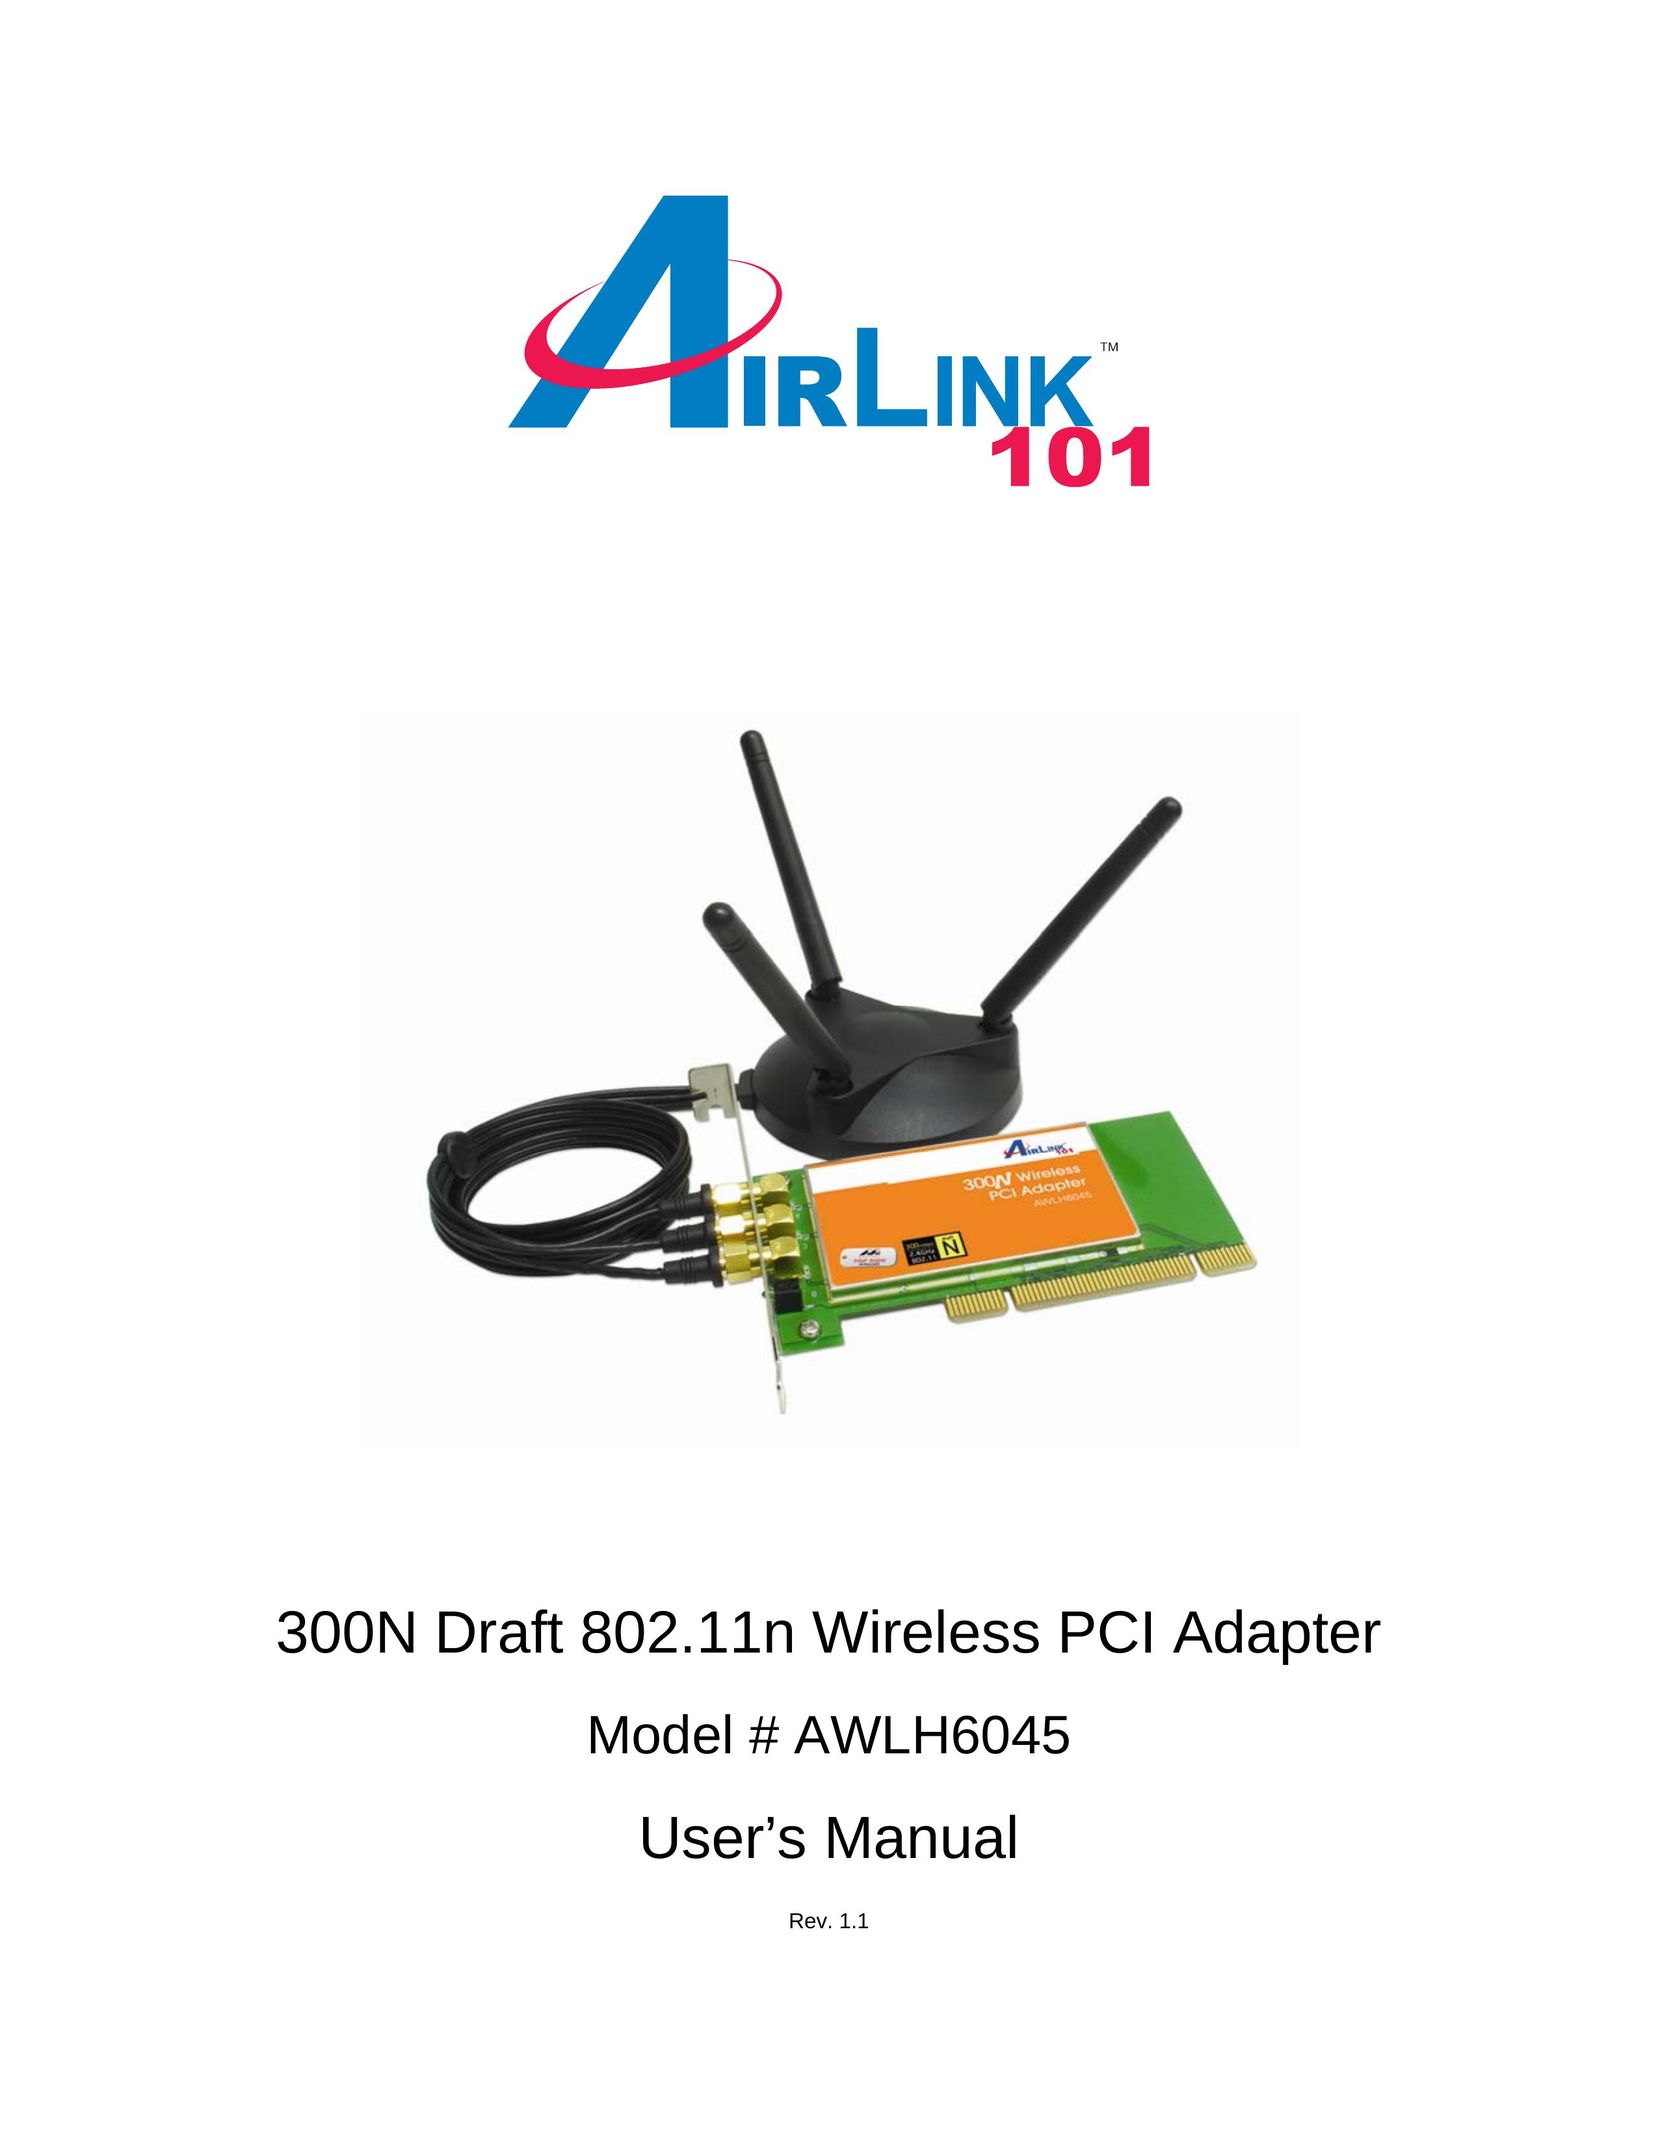 Airlink101 AWLH6045 Network Card User Manual